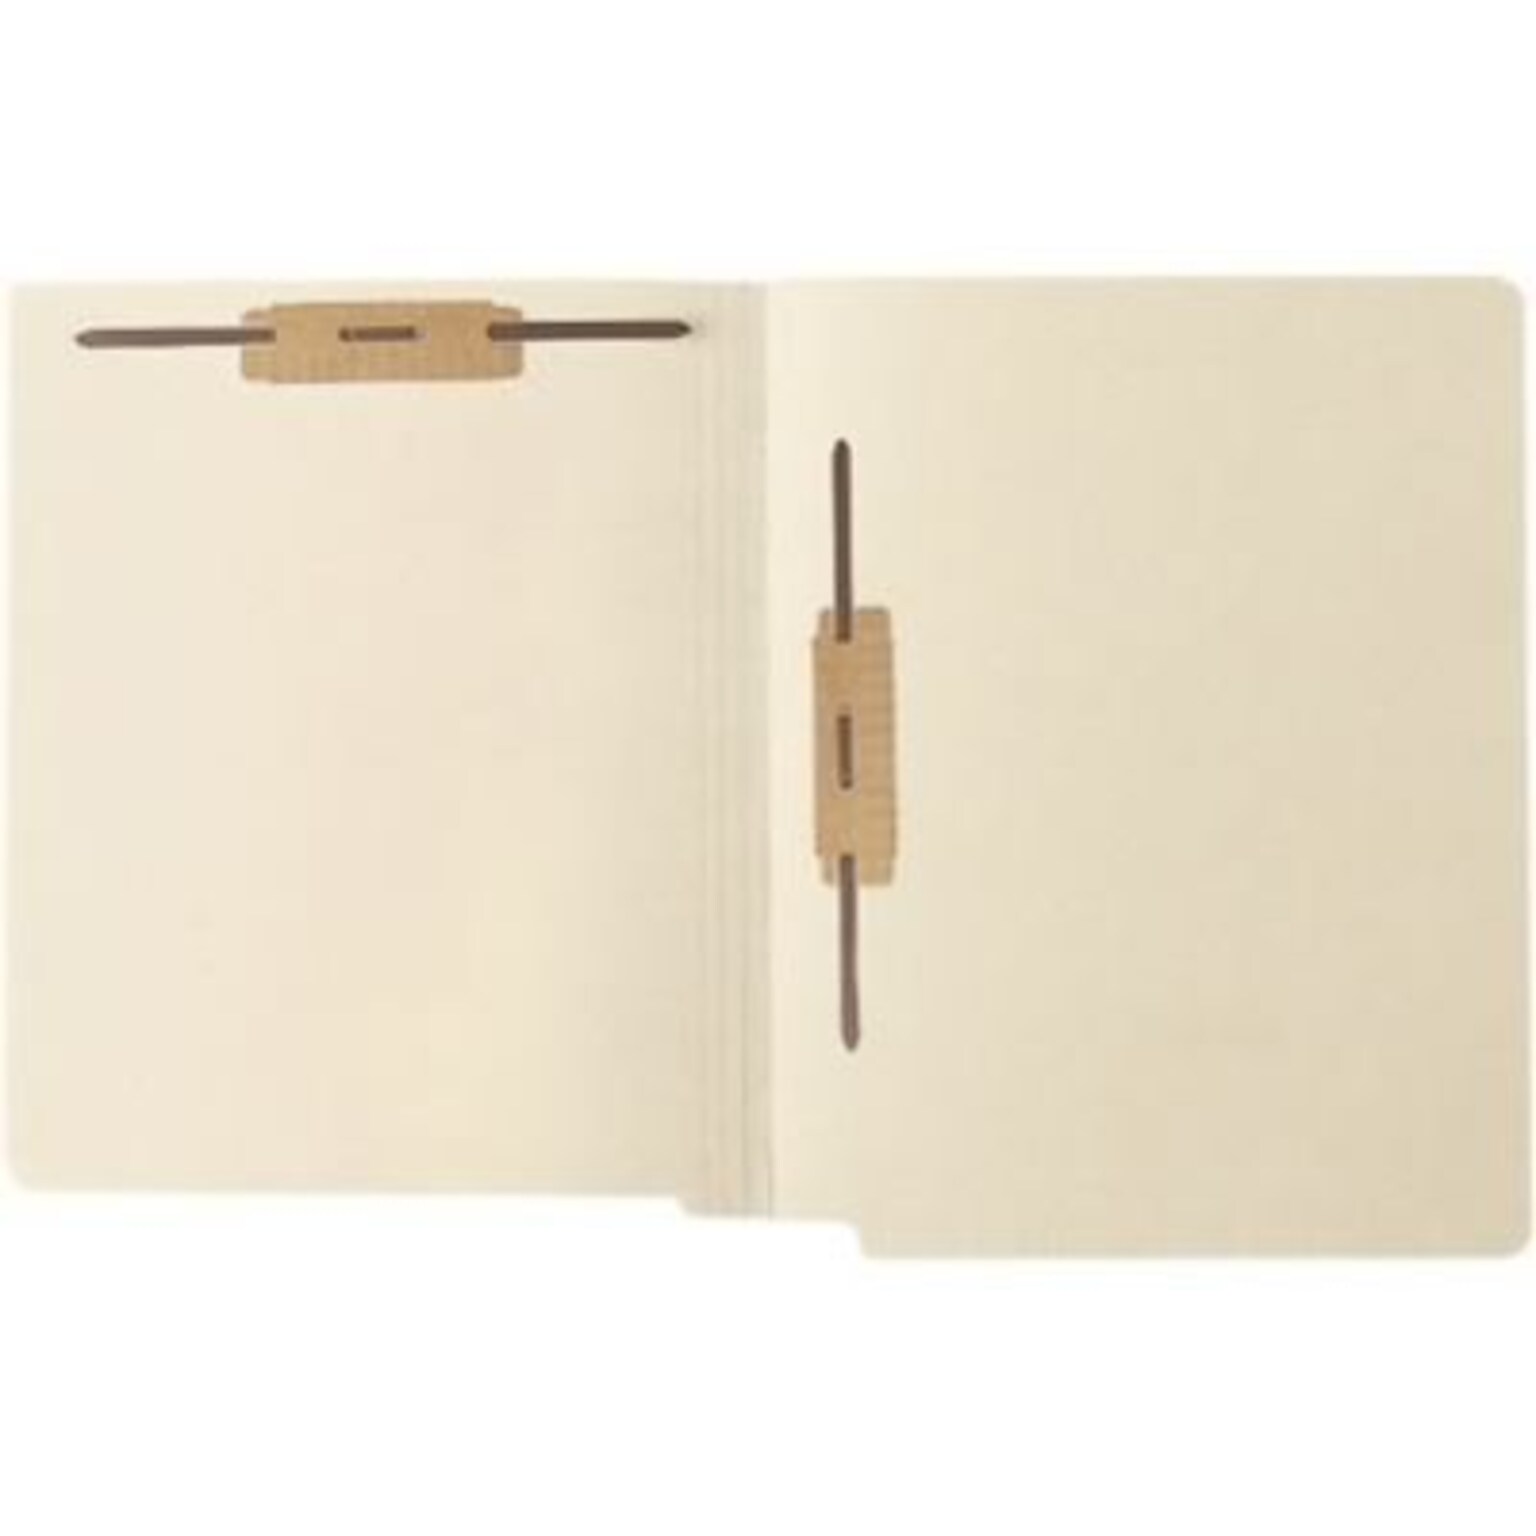 Medical Arts Press® 14 pt. Full-Cut End-Tab File Folders, Two Fasteners, Position 3&5, 50/Bx